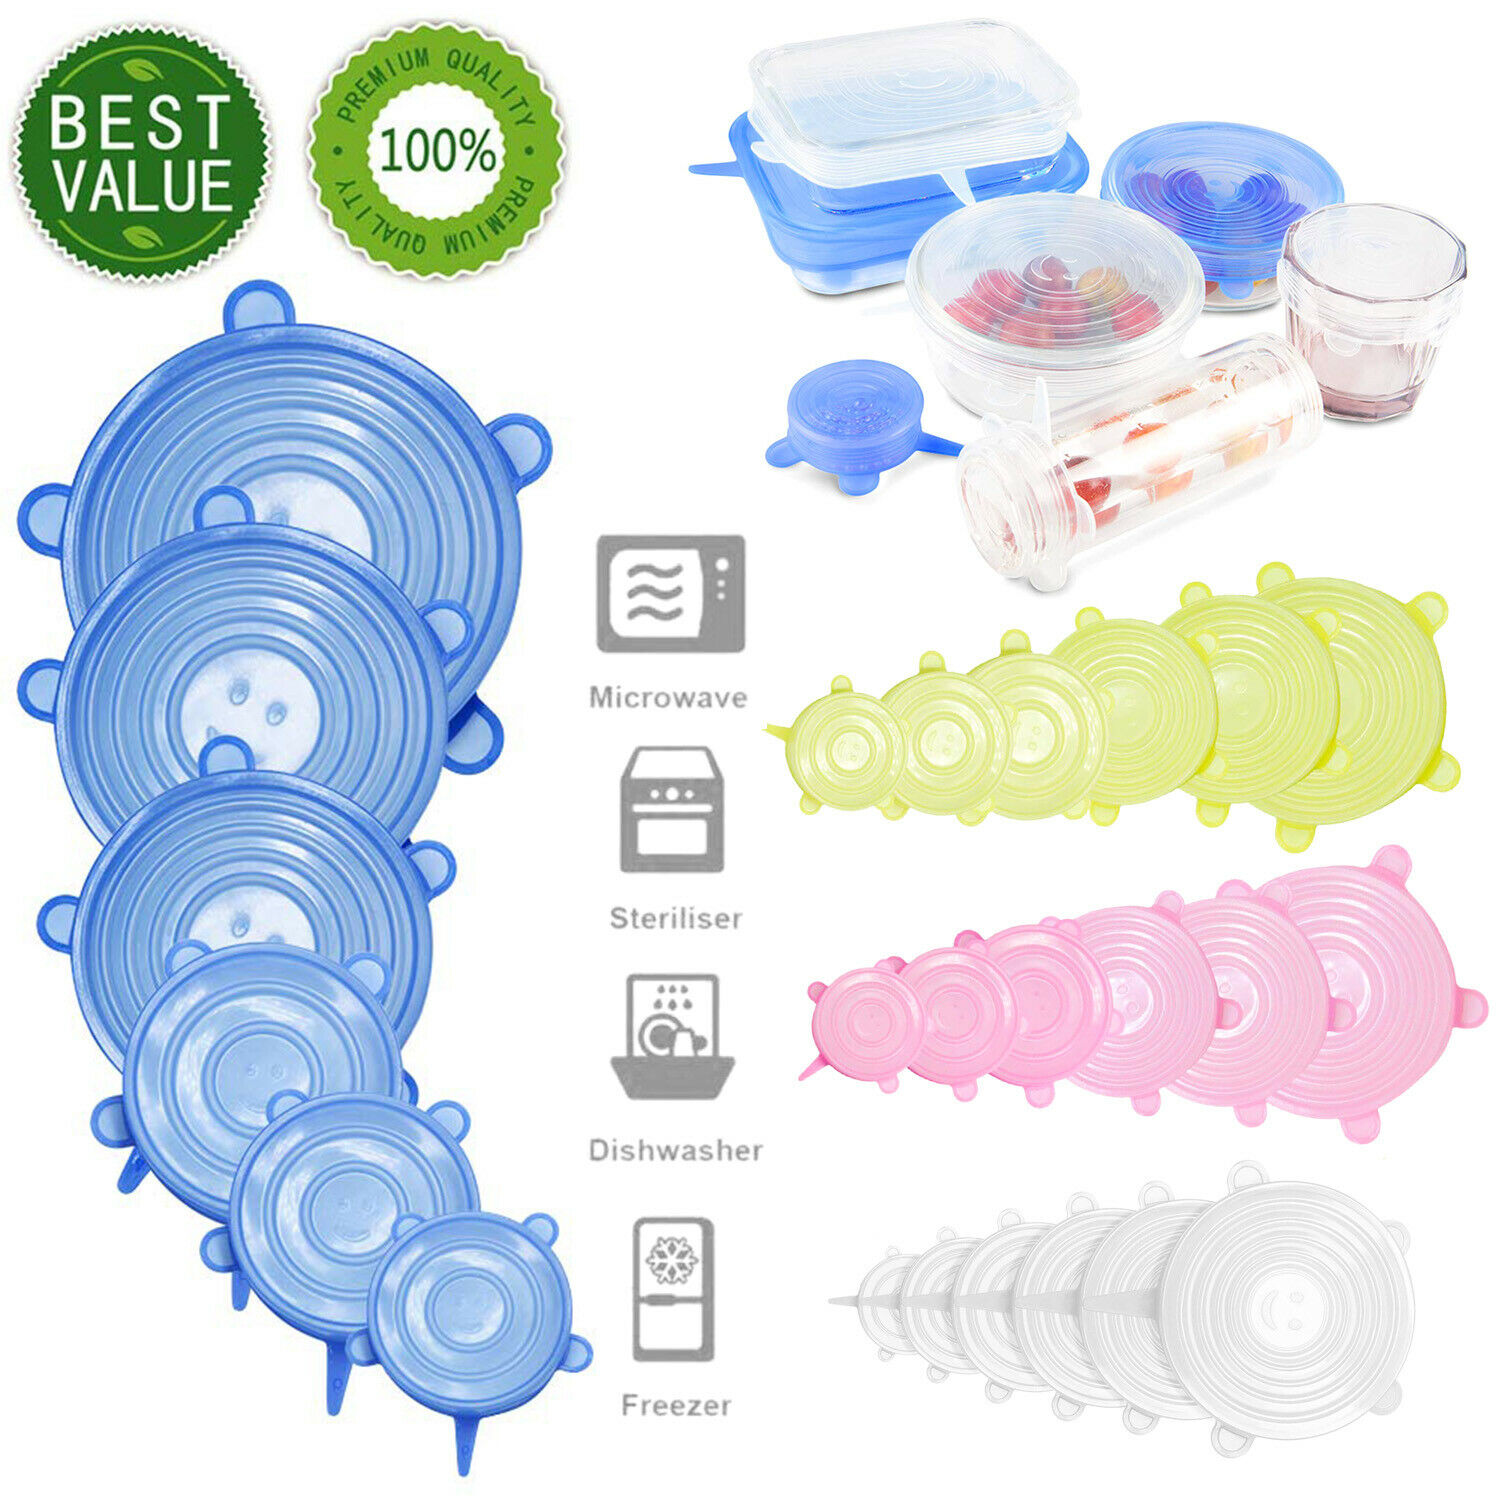 6 Pcs Silicon Reusable Stretch Lids Food Bowl Containers Dishes Covers